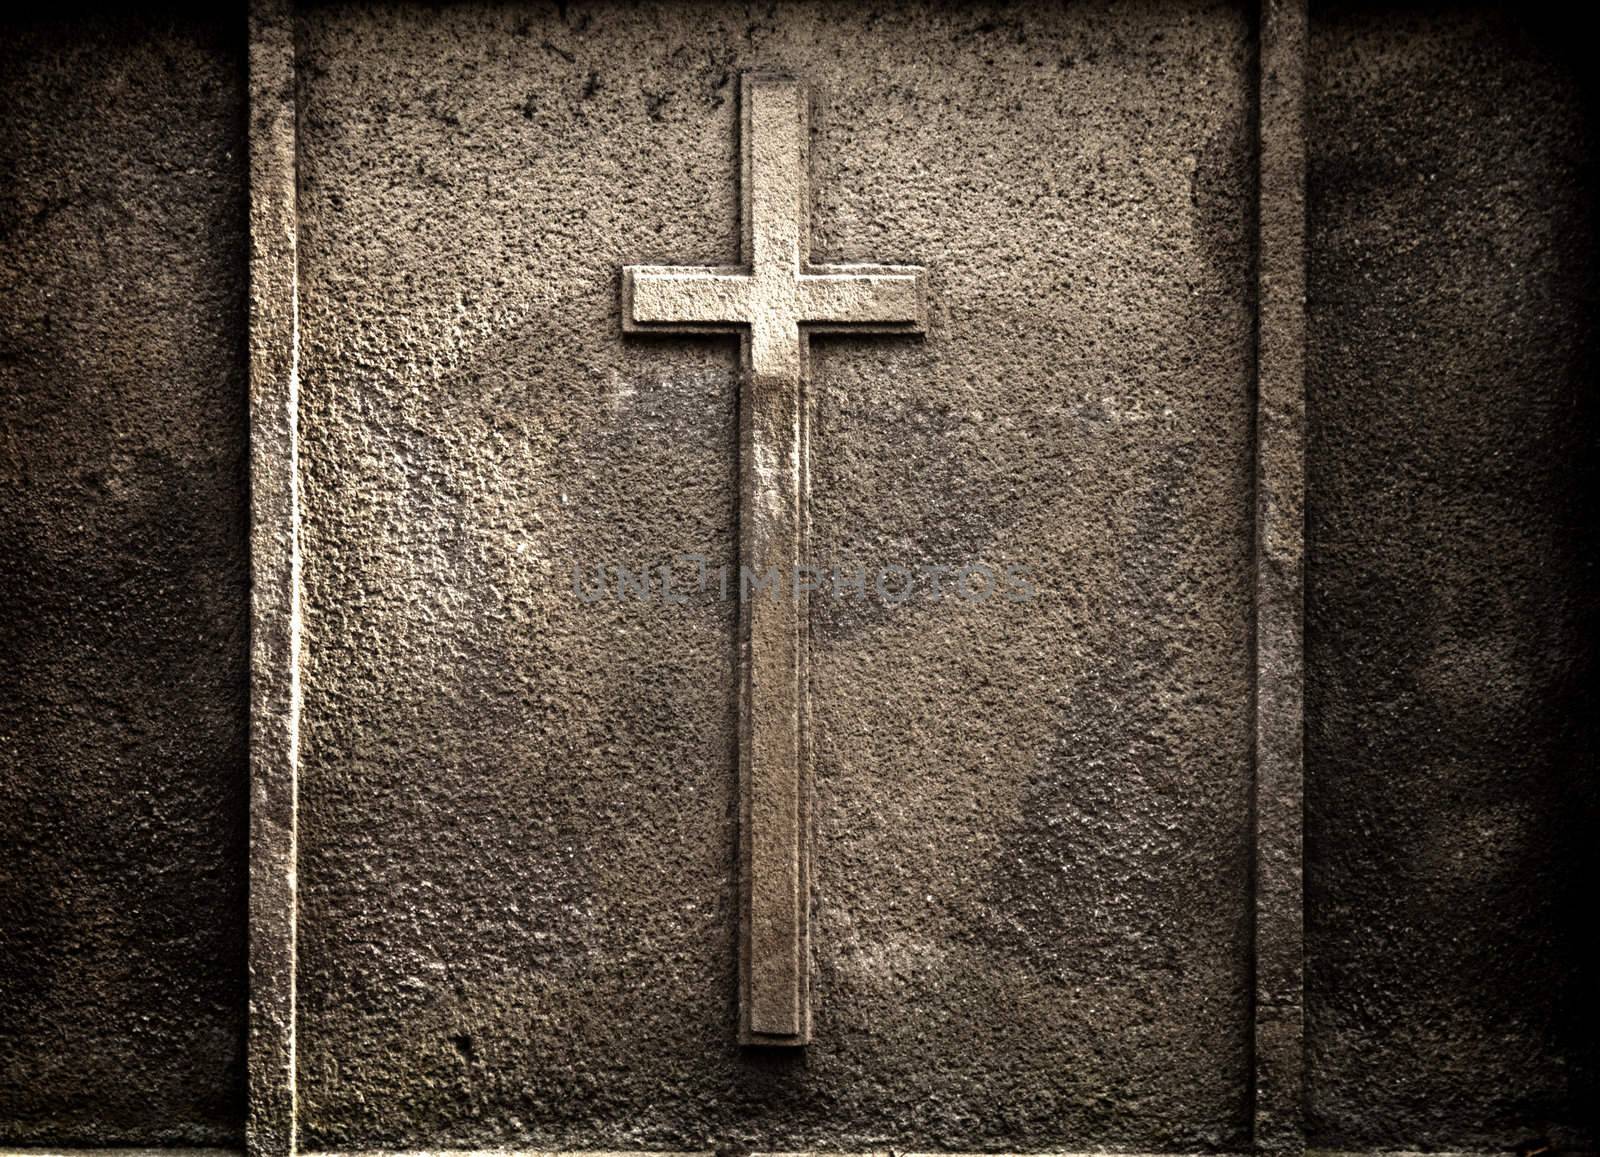 cross on wall background 